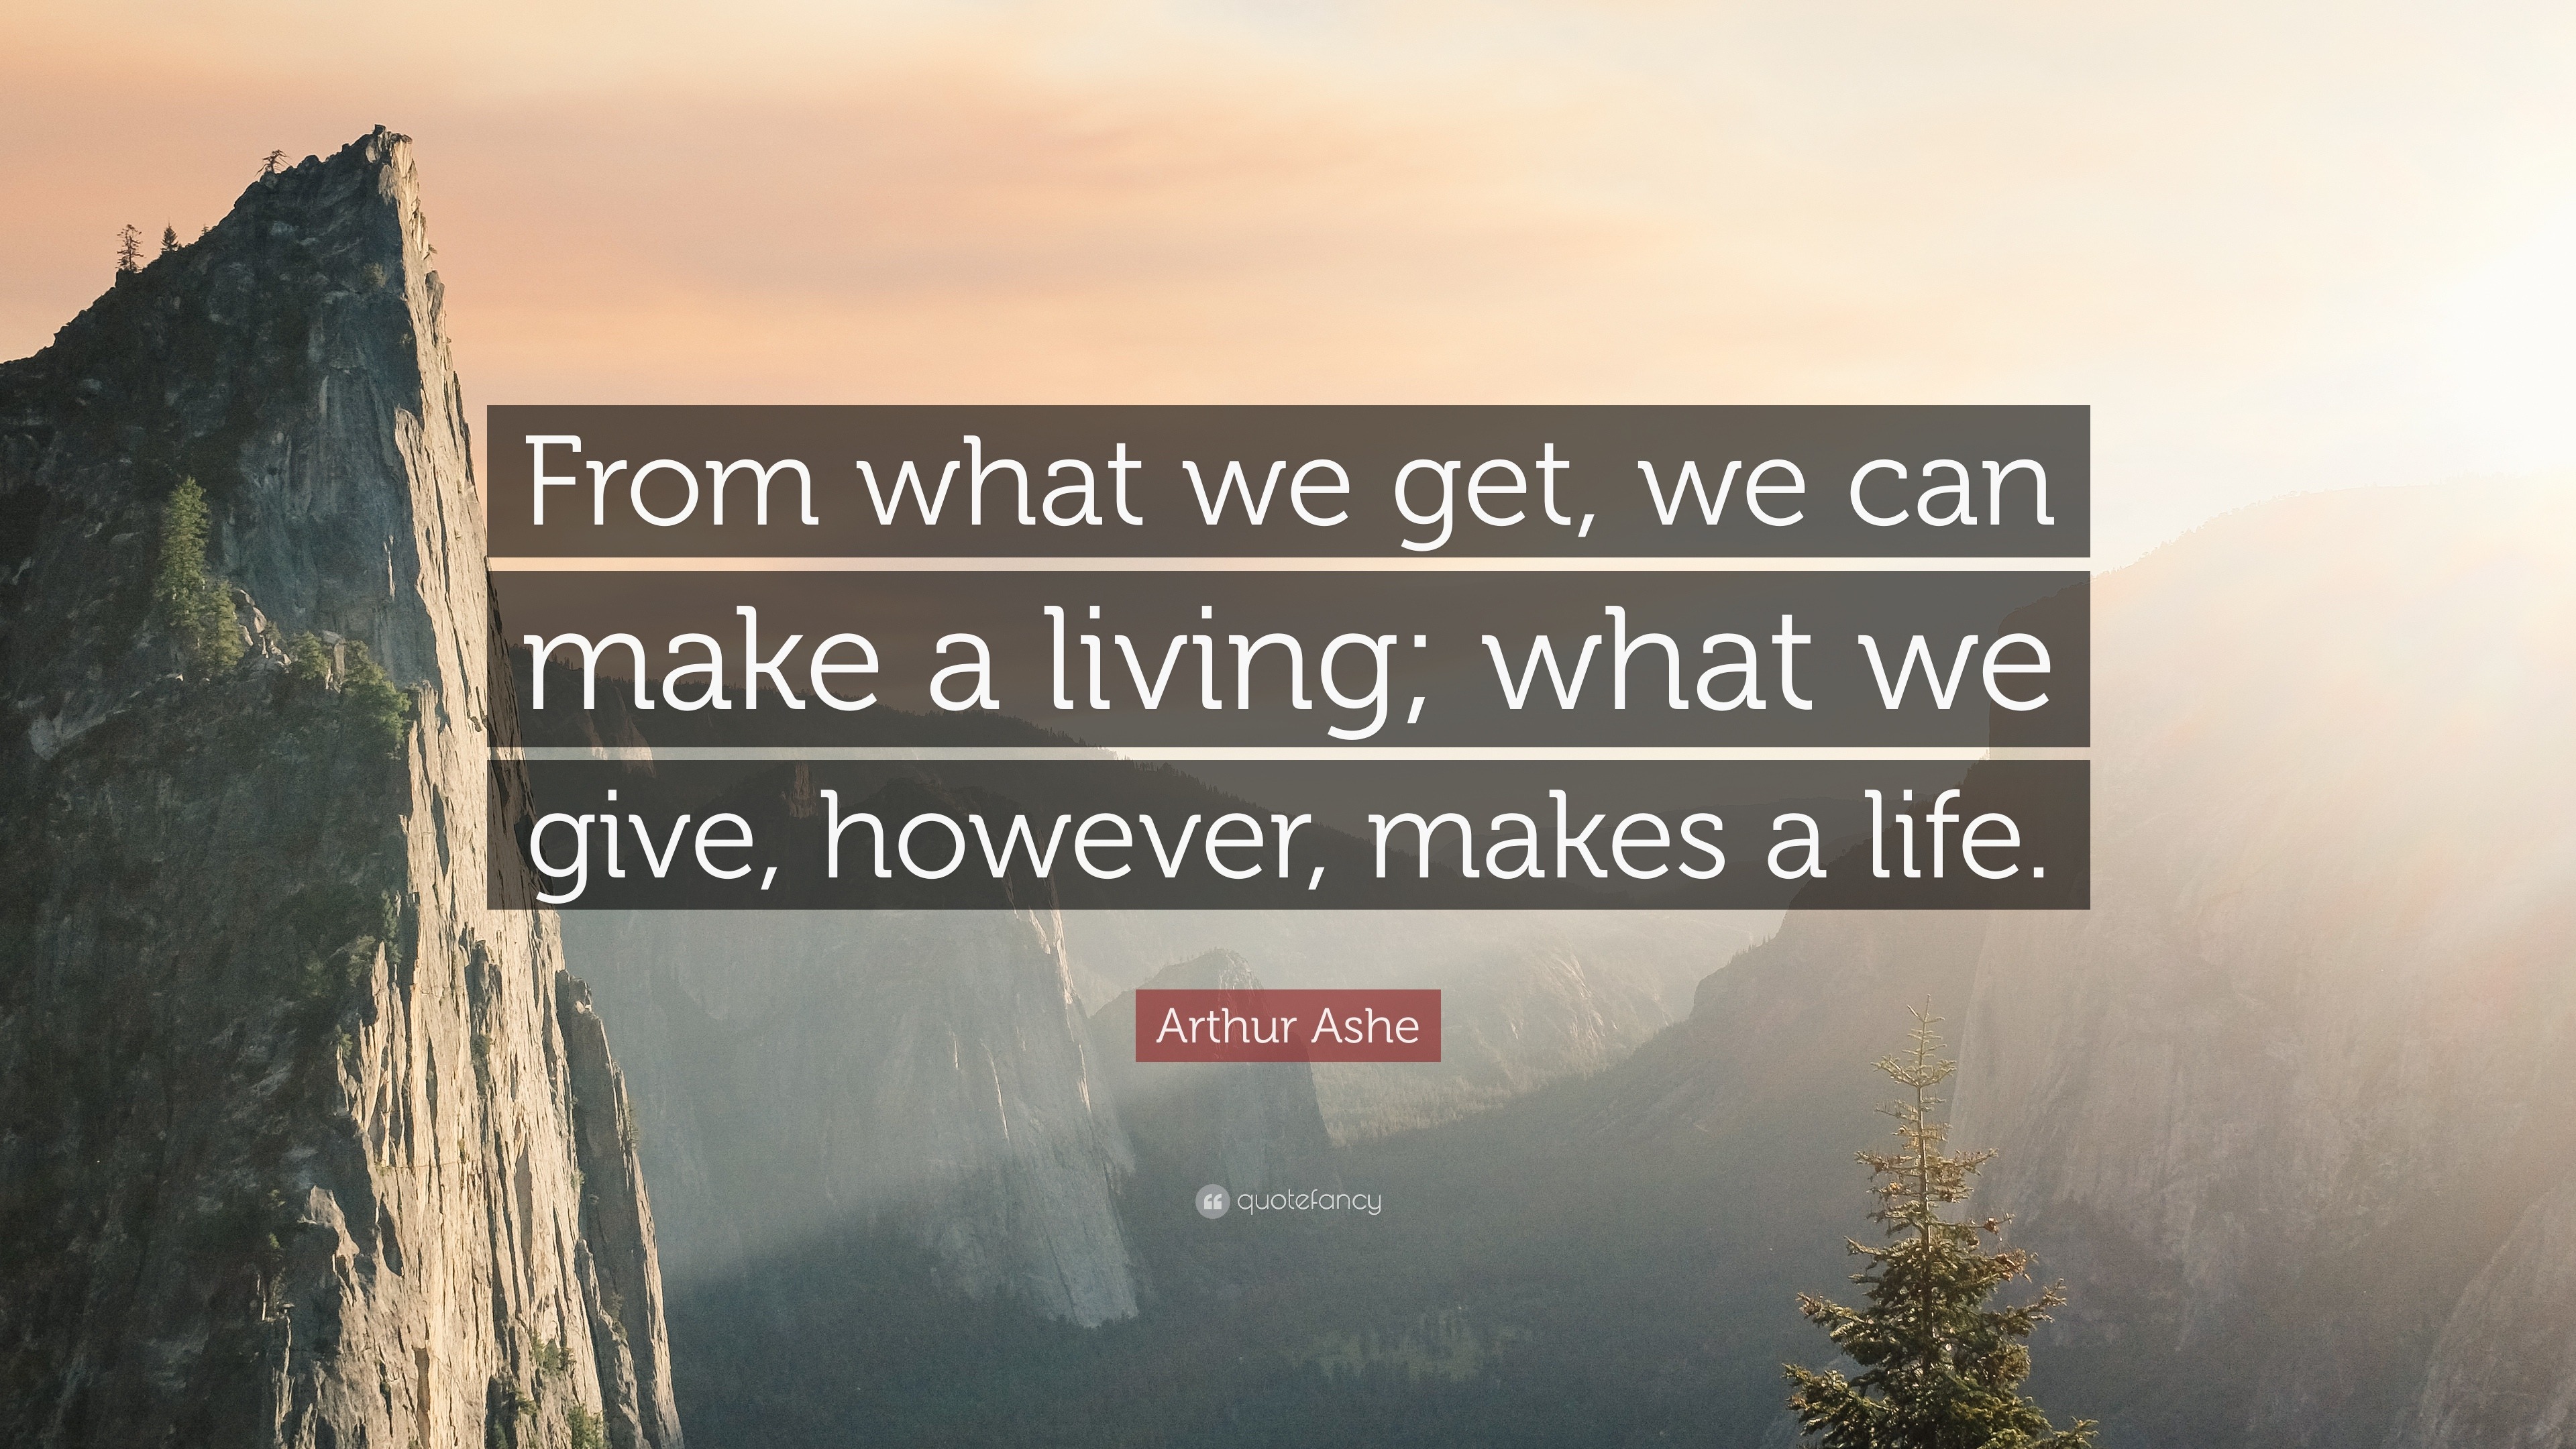 Arthur Ashe Quote From What We Get We Can Make A Living What We Give However